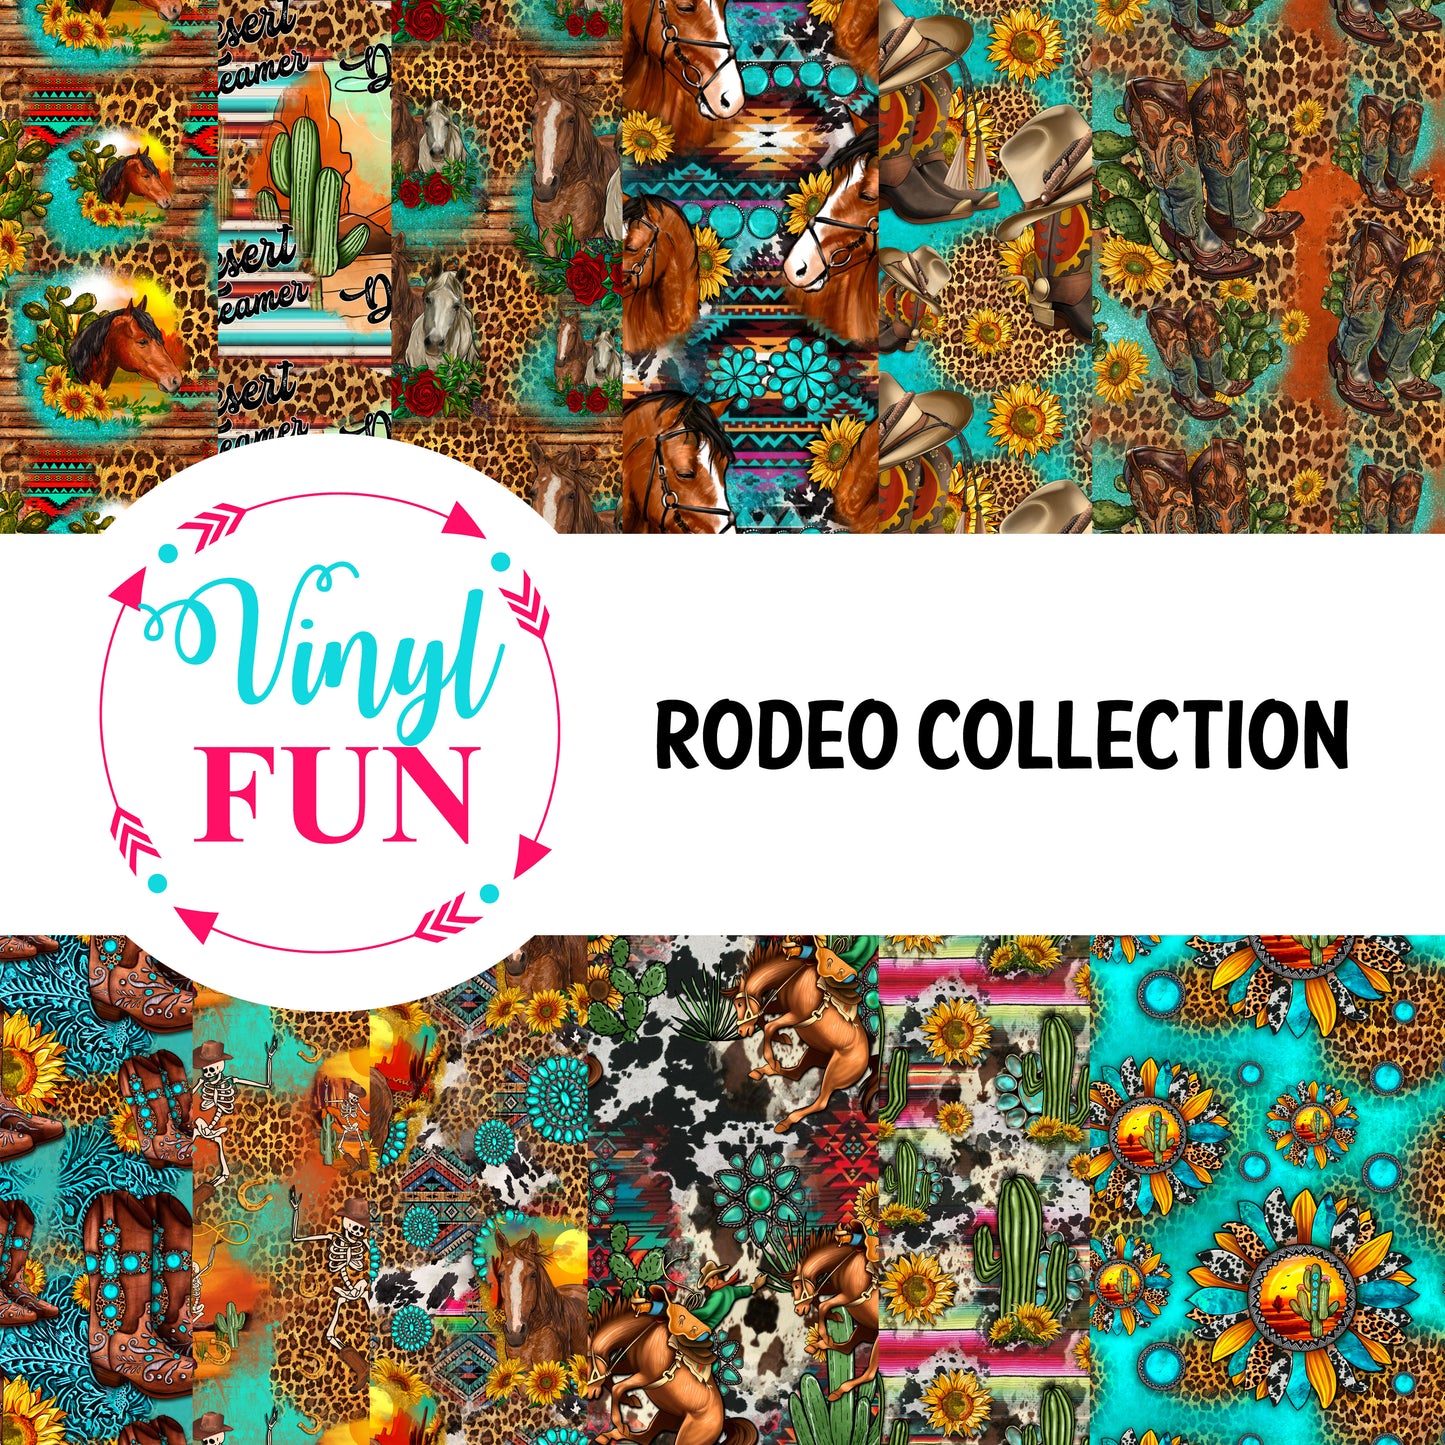 Rodeo Collection